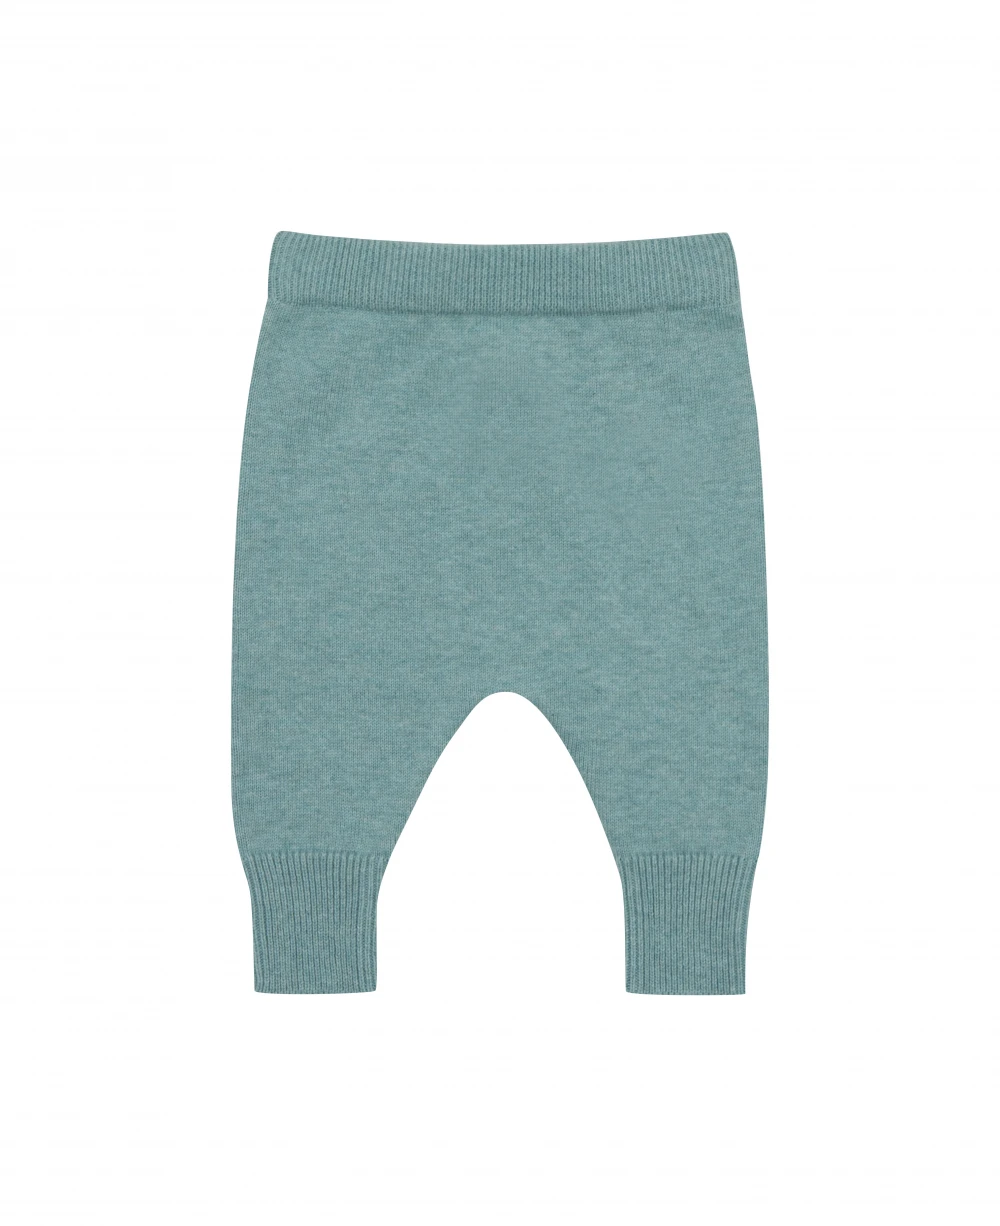 Trousers for children in organic cotton and wool